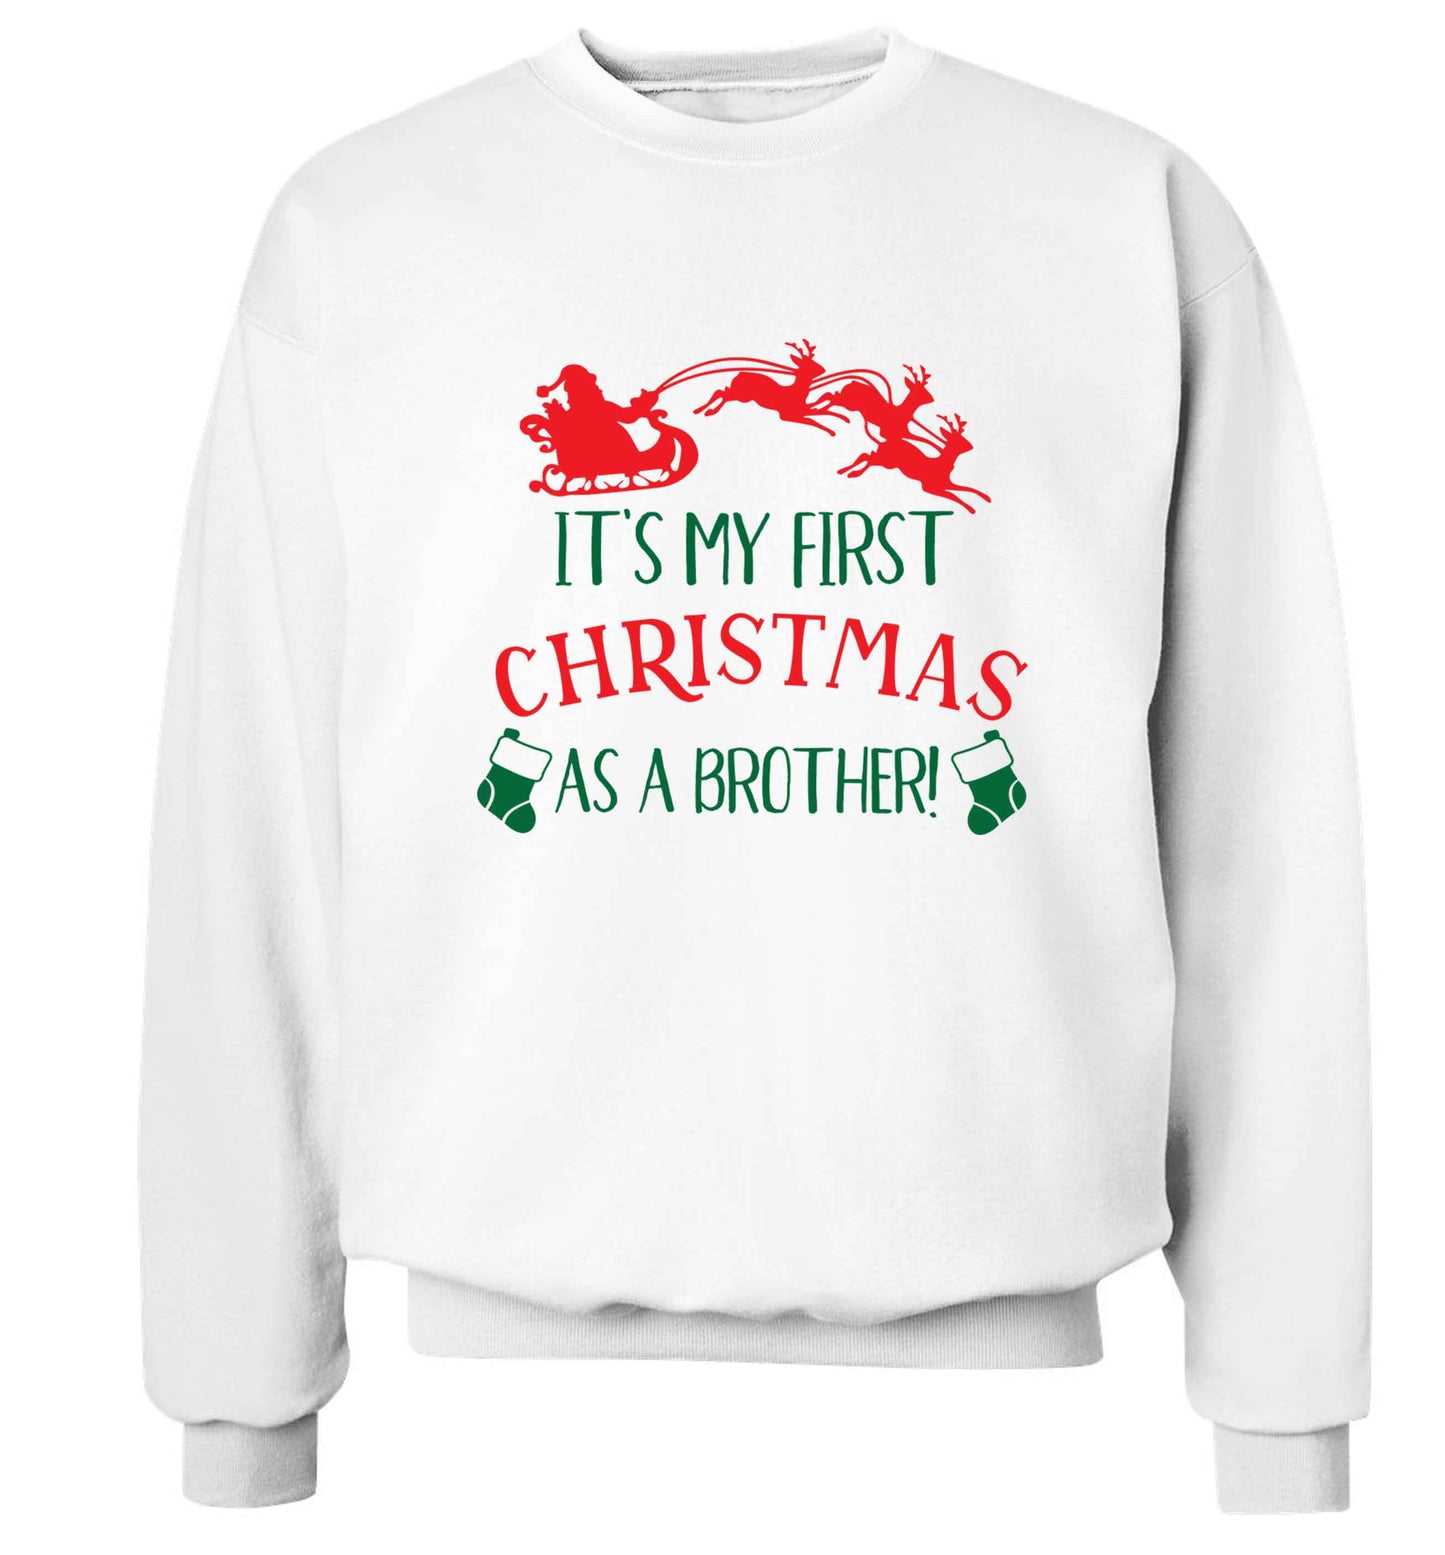 It's my first Christmas as a brother! Adult's unisex white Sweater 2XL